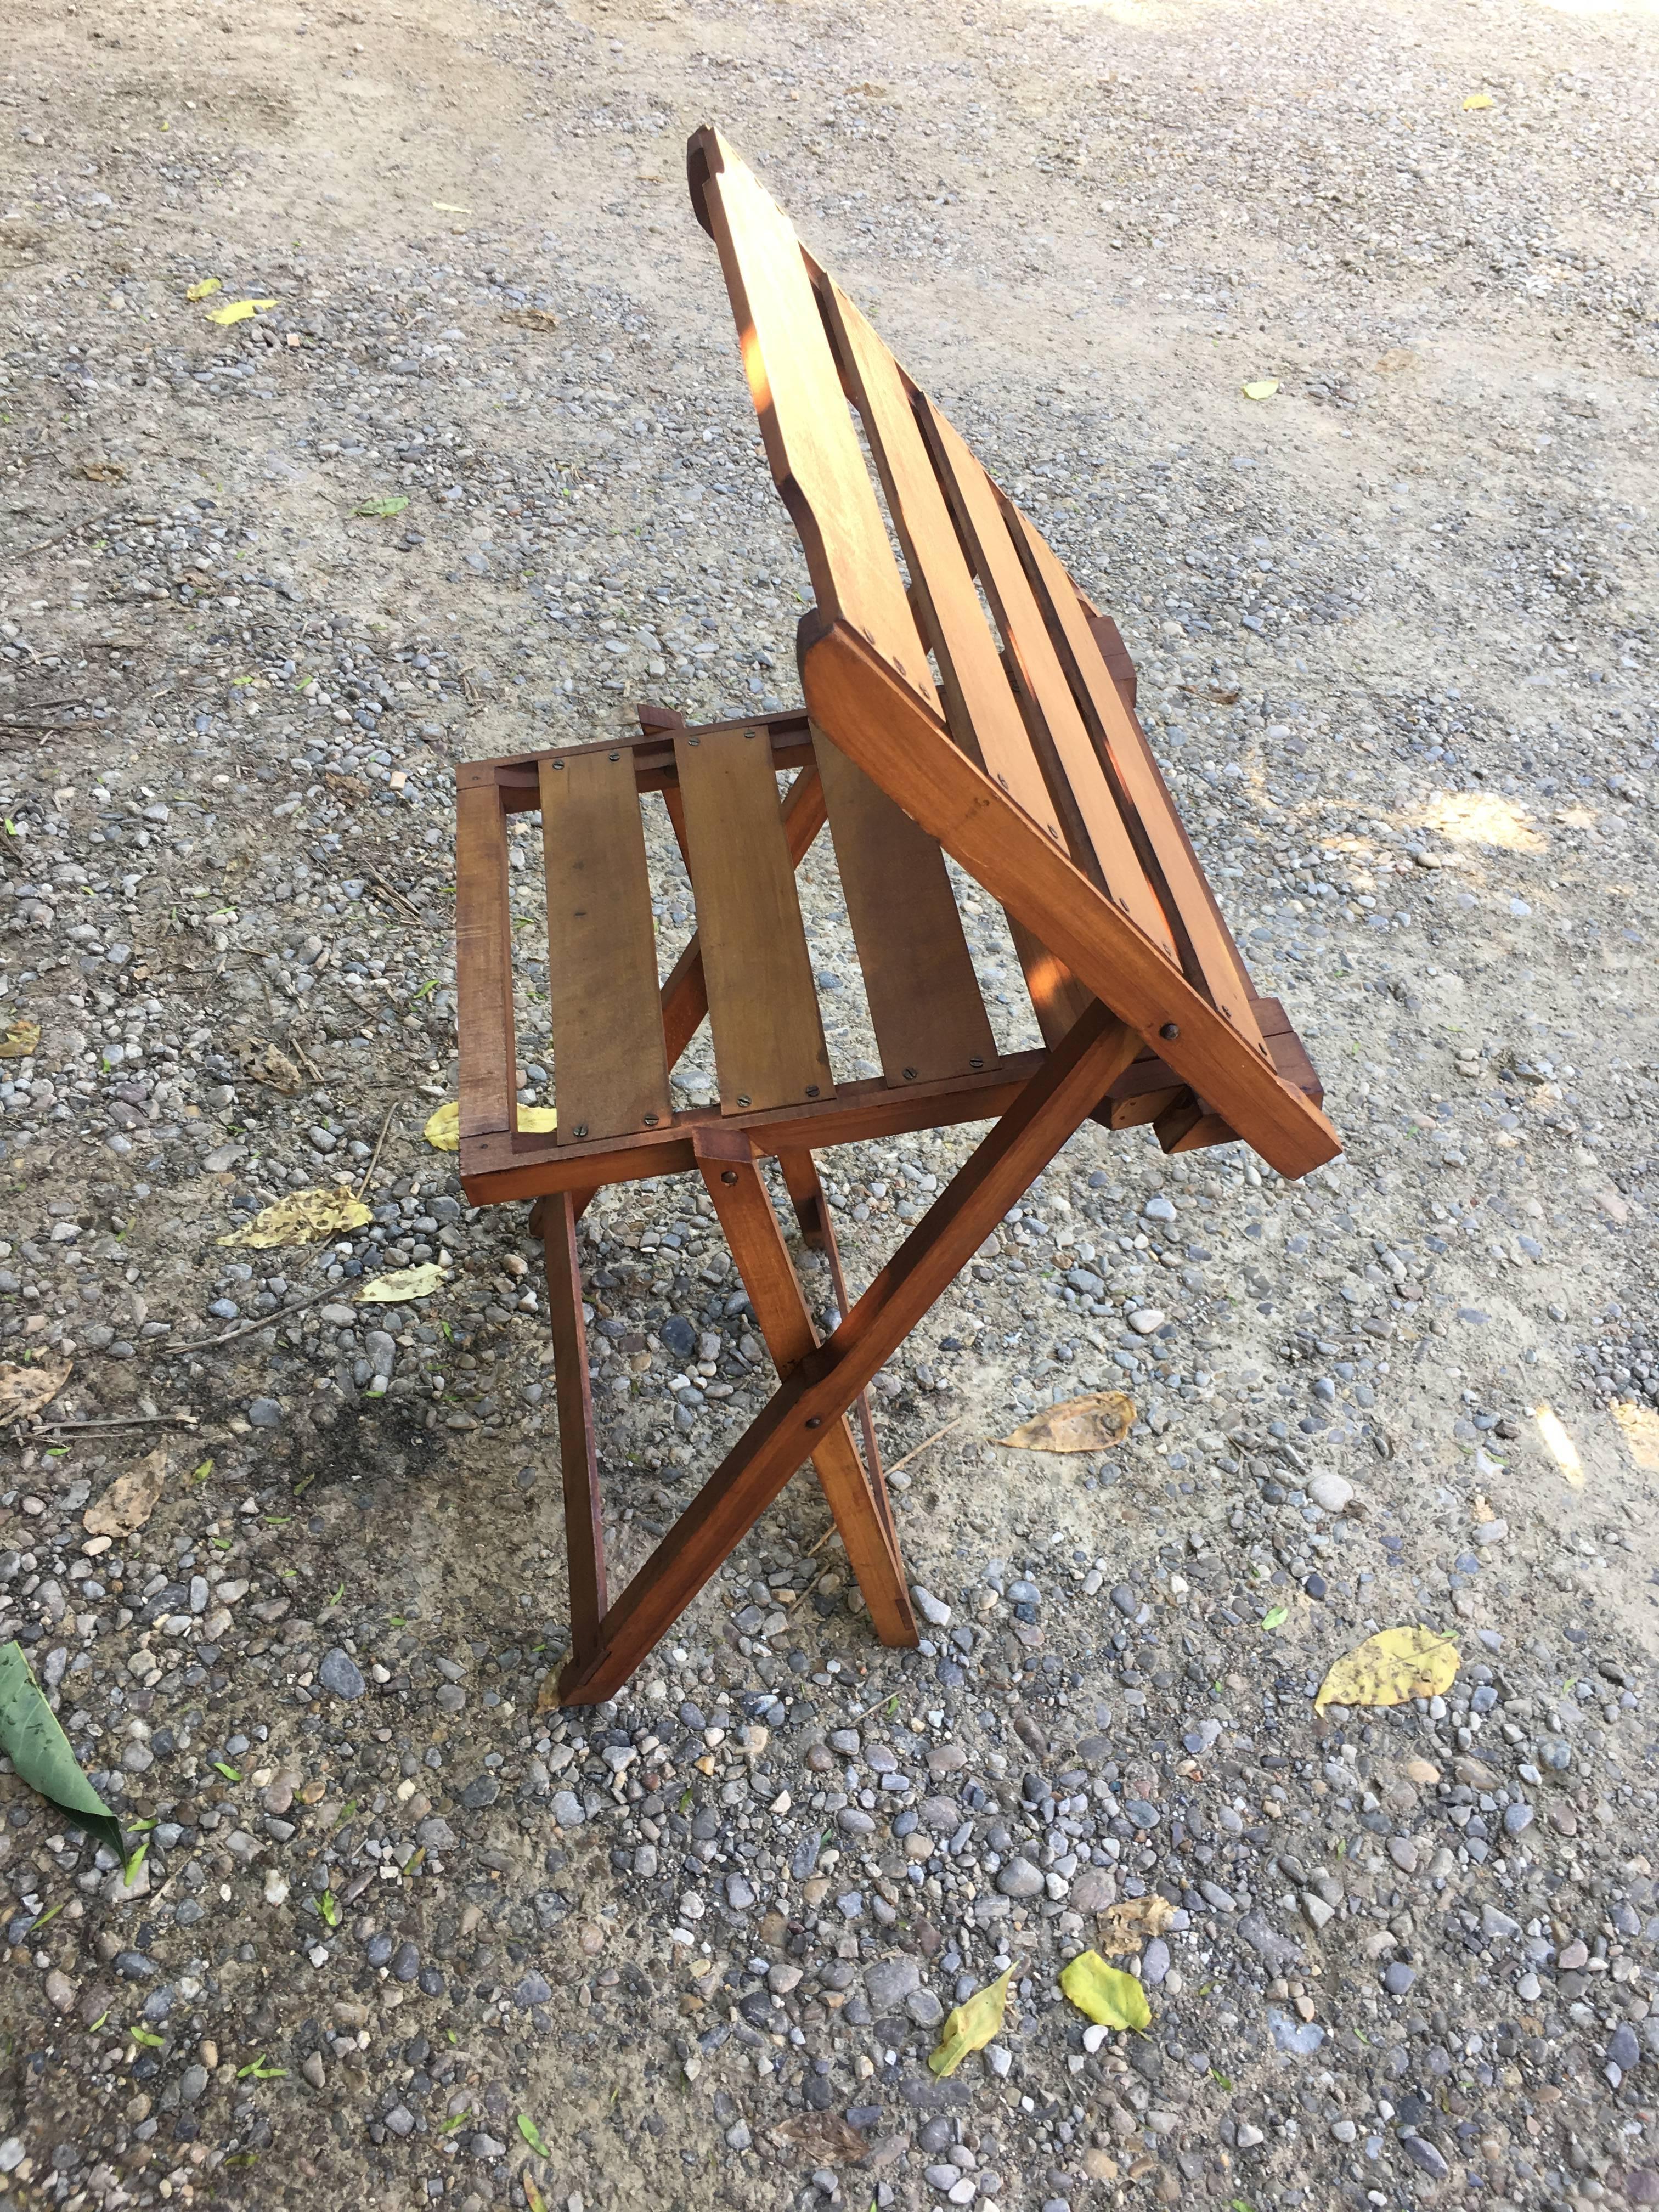 Italian Picnic Folding Table with Chairs from 1950s For Sale 2